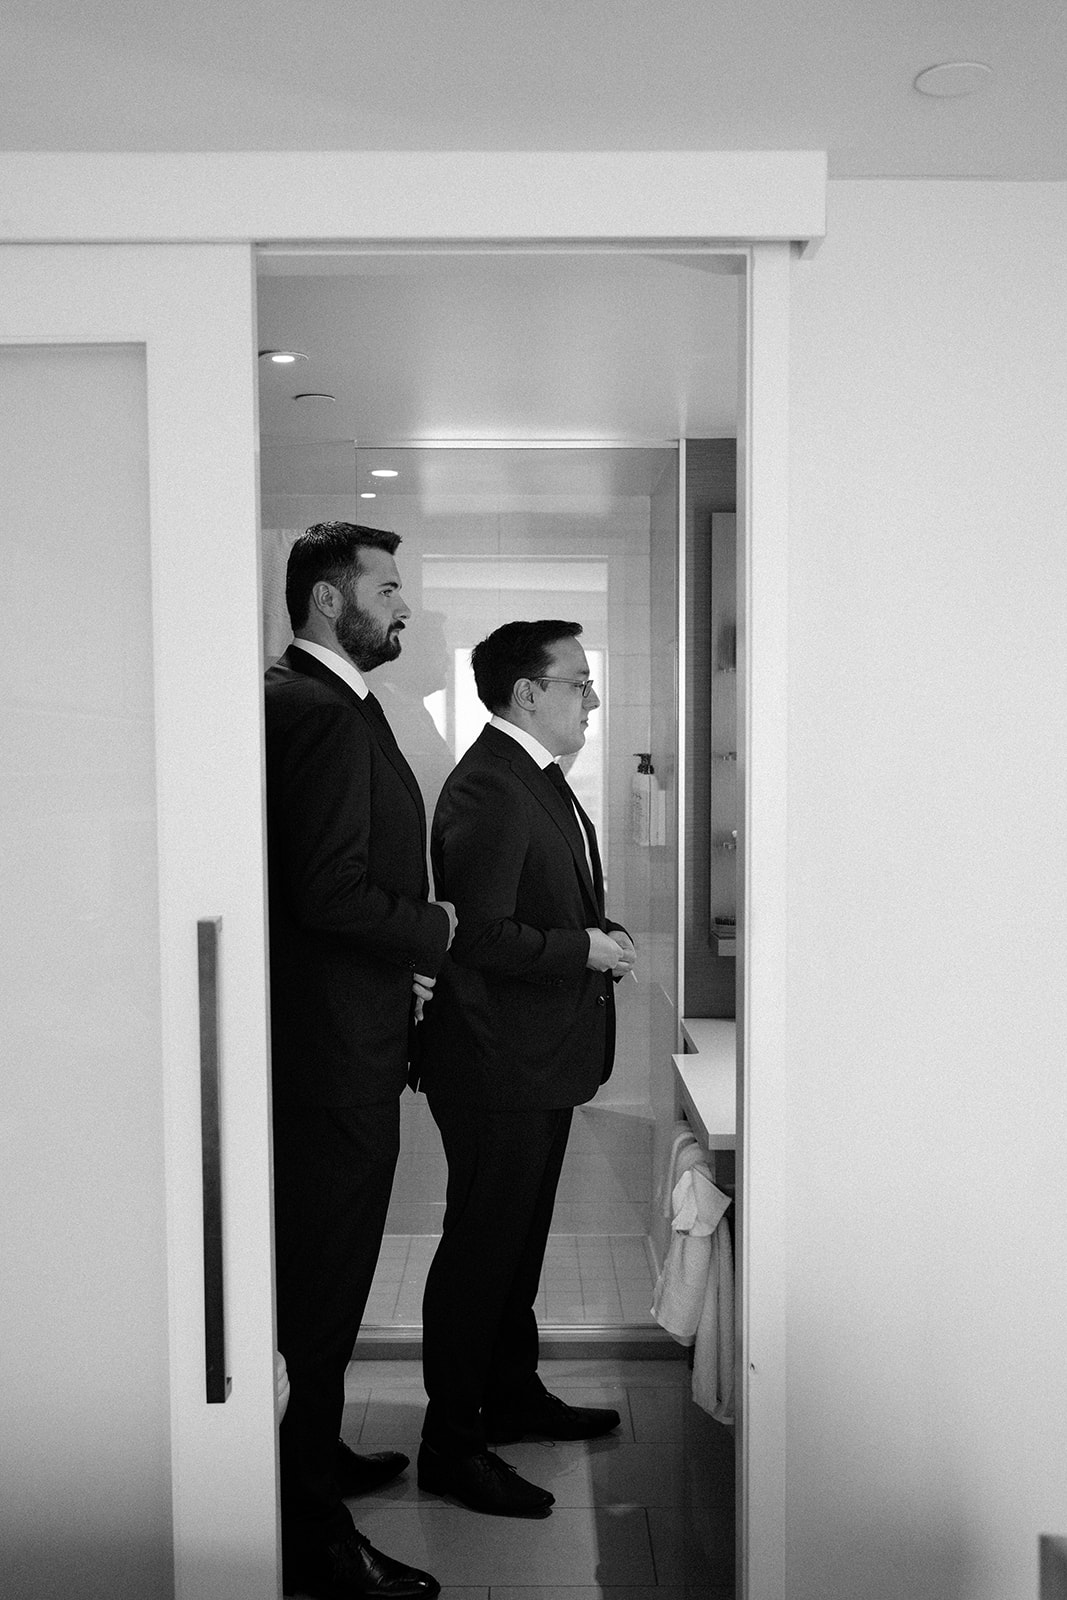 Portrait of two men getting ready for the wedding ceremony.